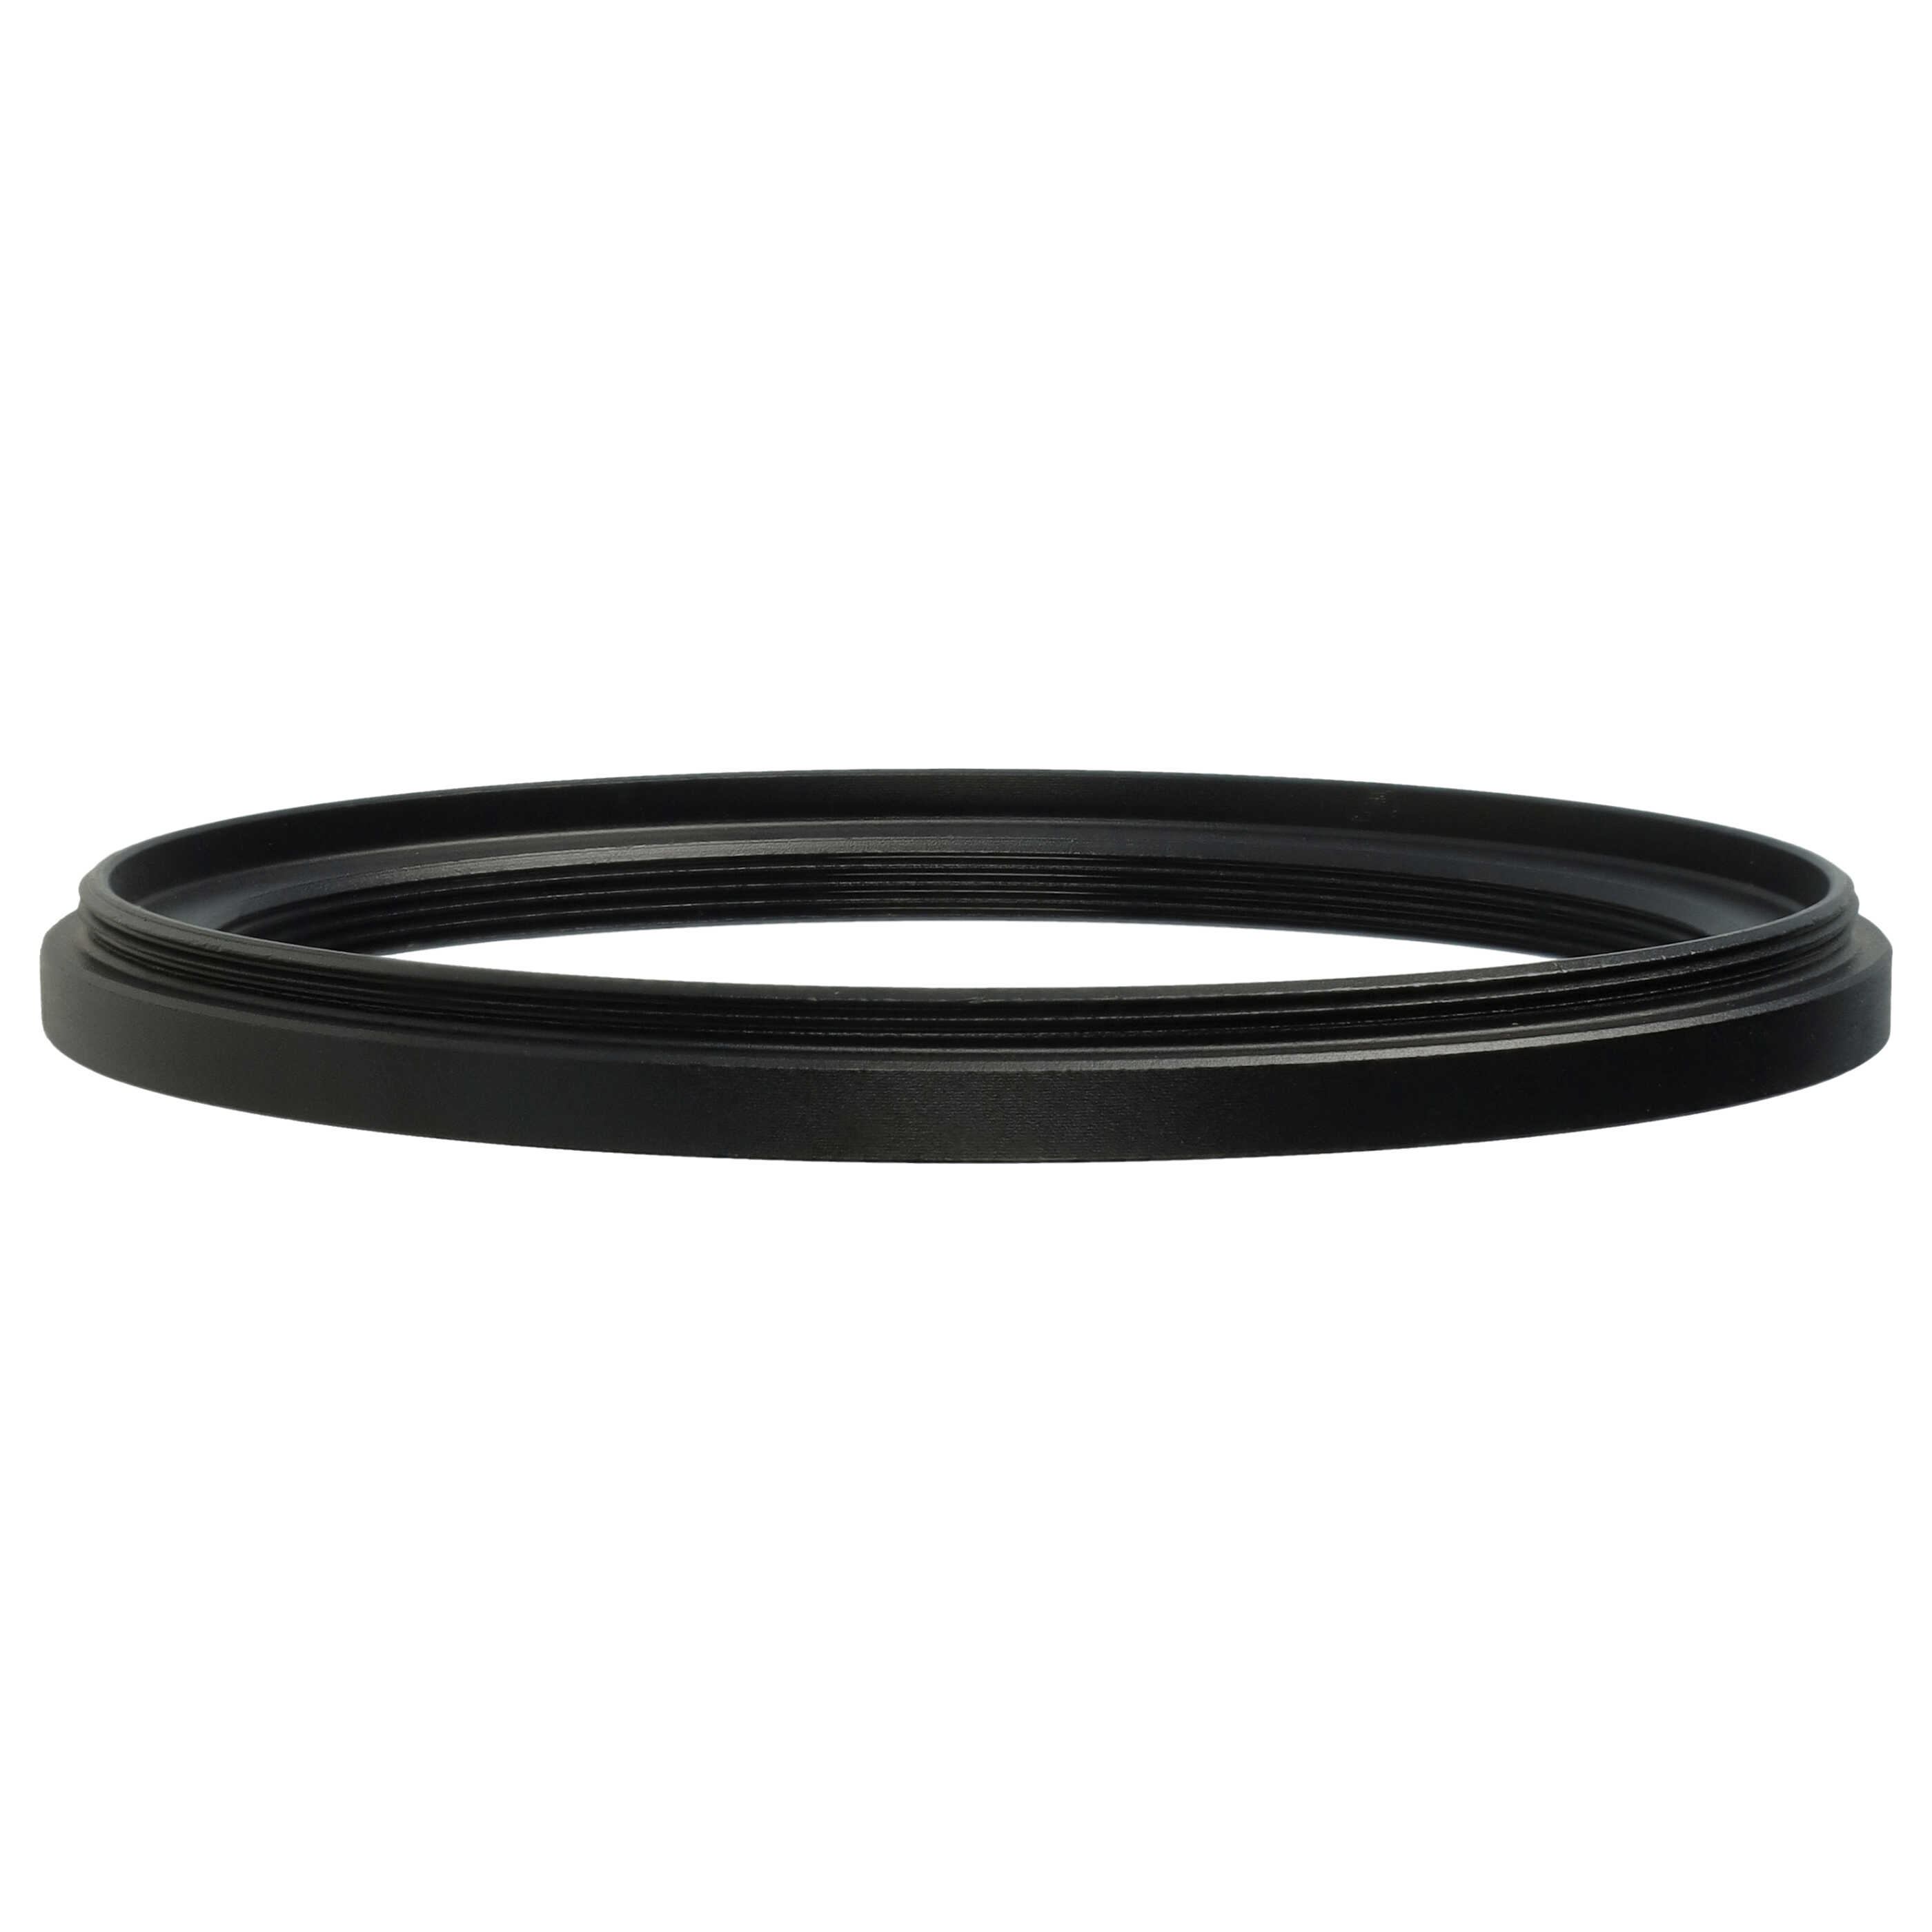 Step-Down Ring Adapter from 72 mm to 62 mm for various Camera Lenses